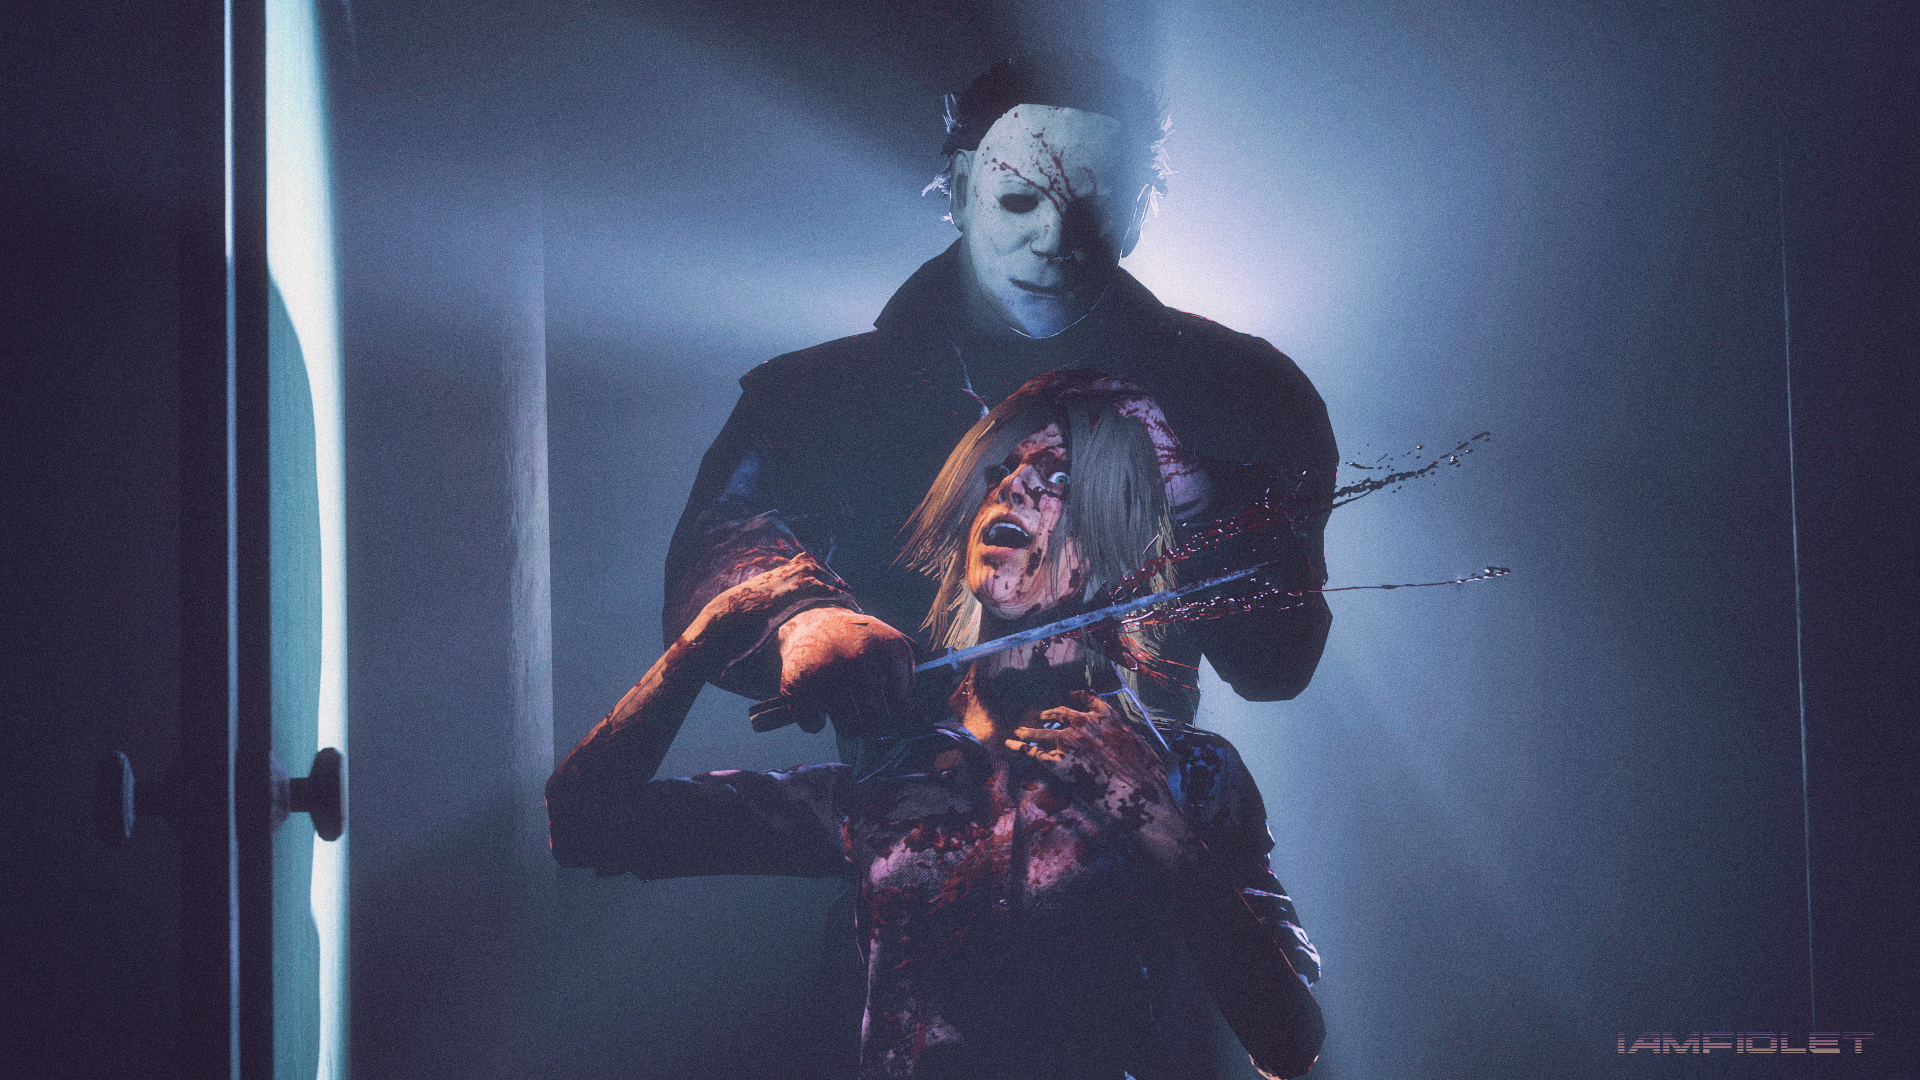 Michael Myers & Laurie Strode. Michael myers, Horror movie icons, Halloween memes